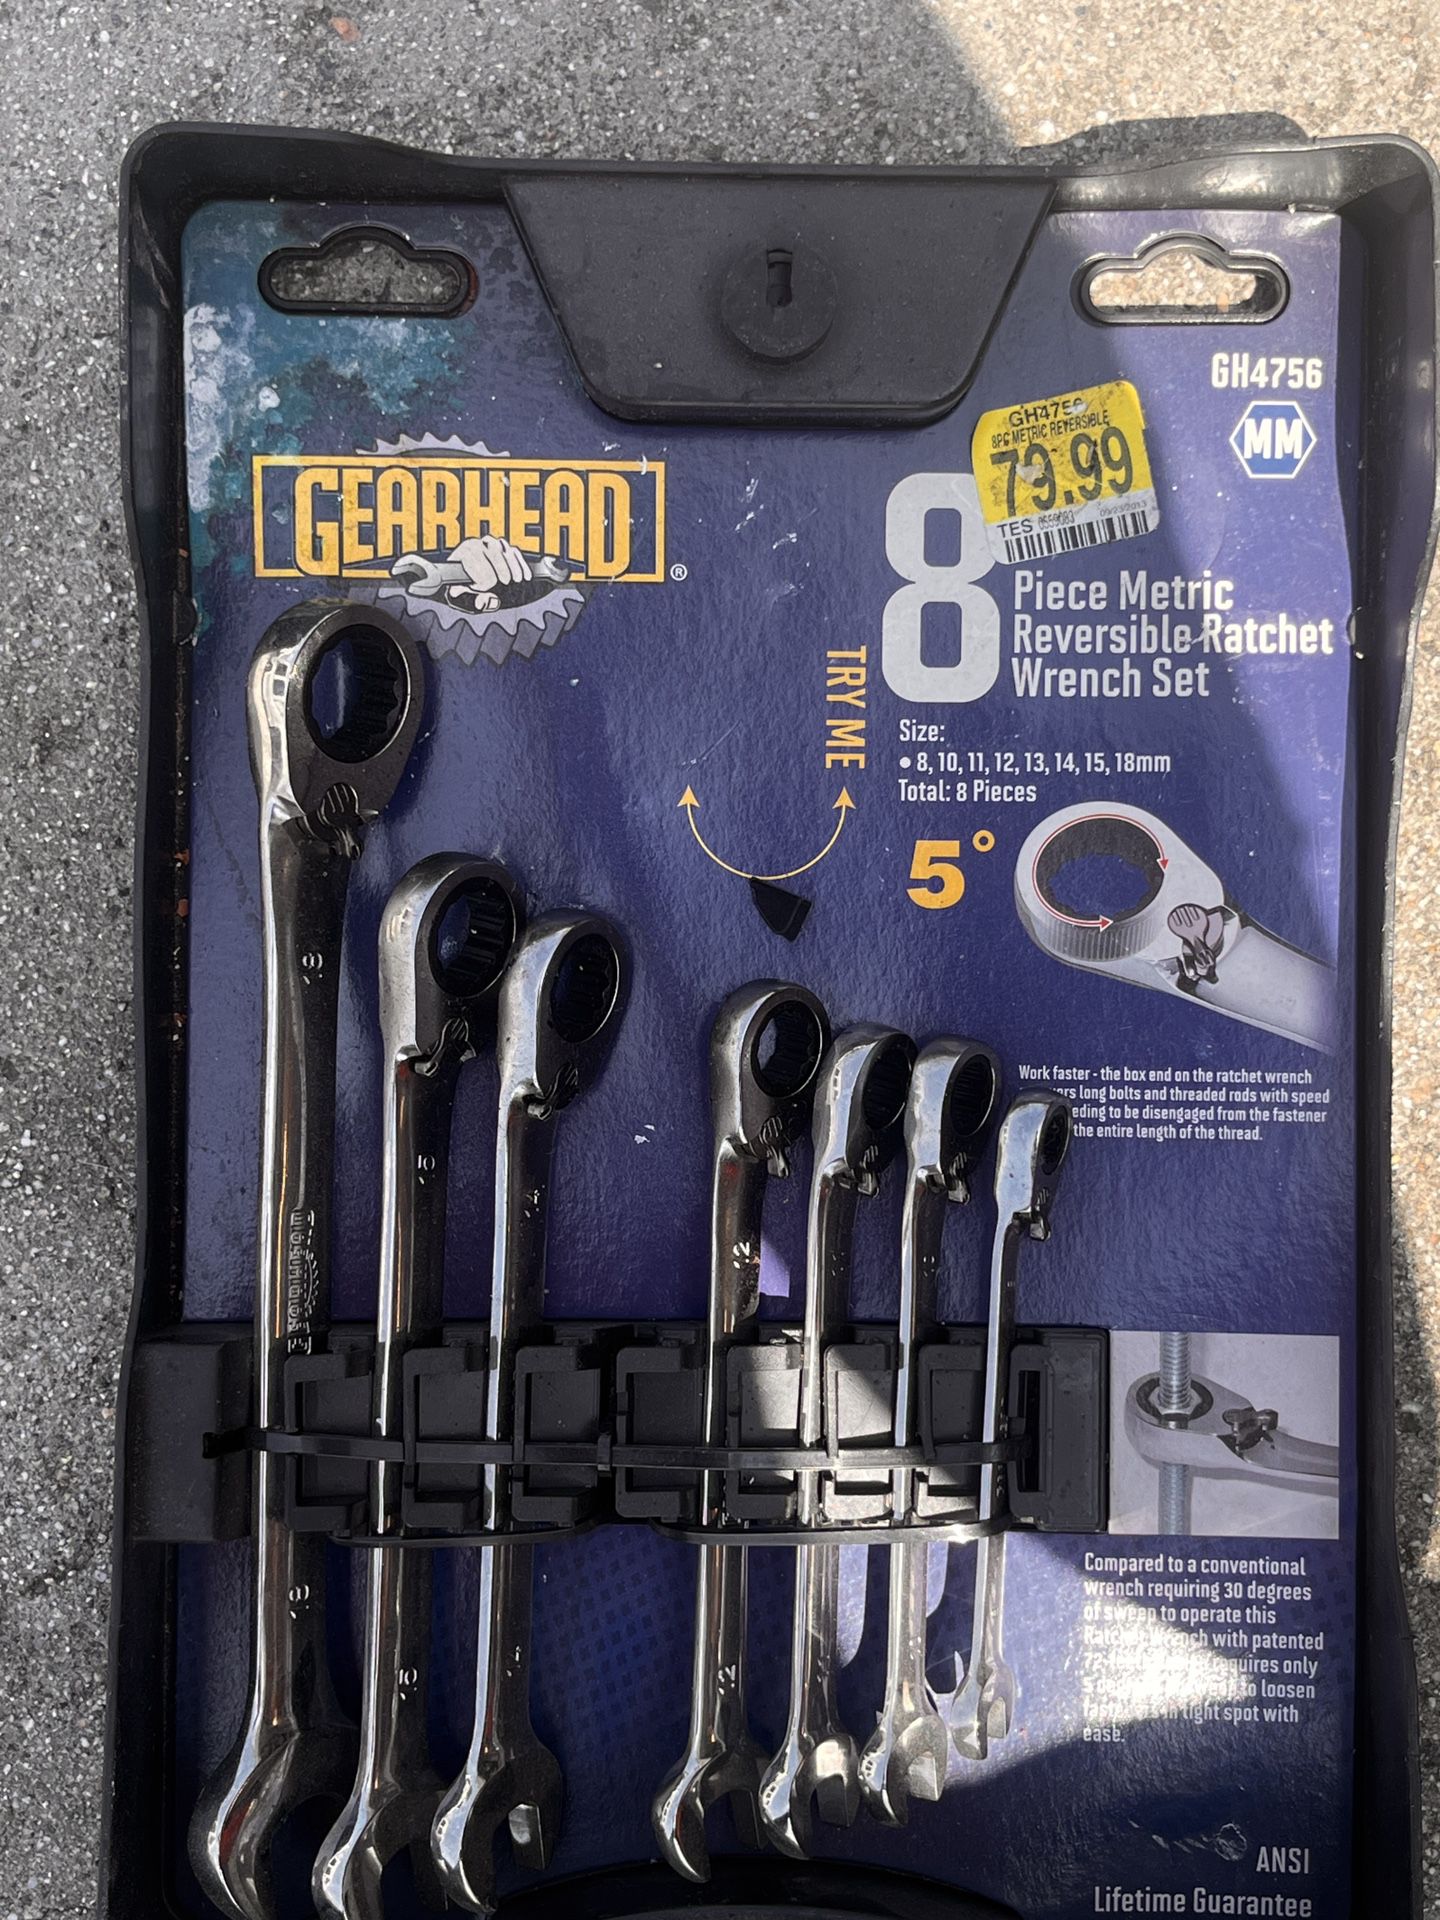 Gearhead Wrenches 